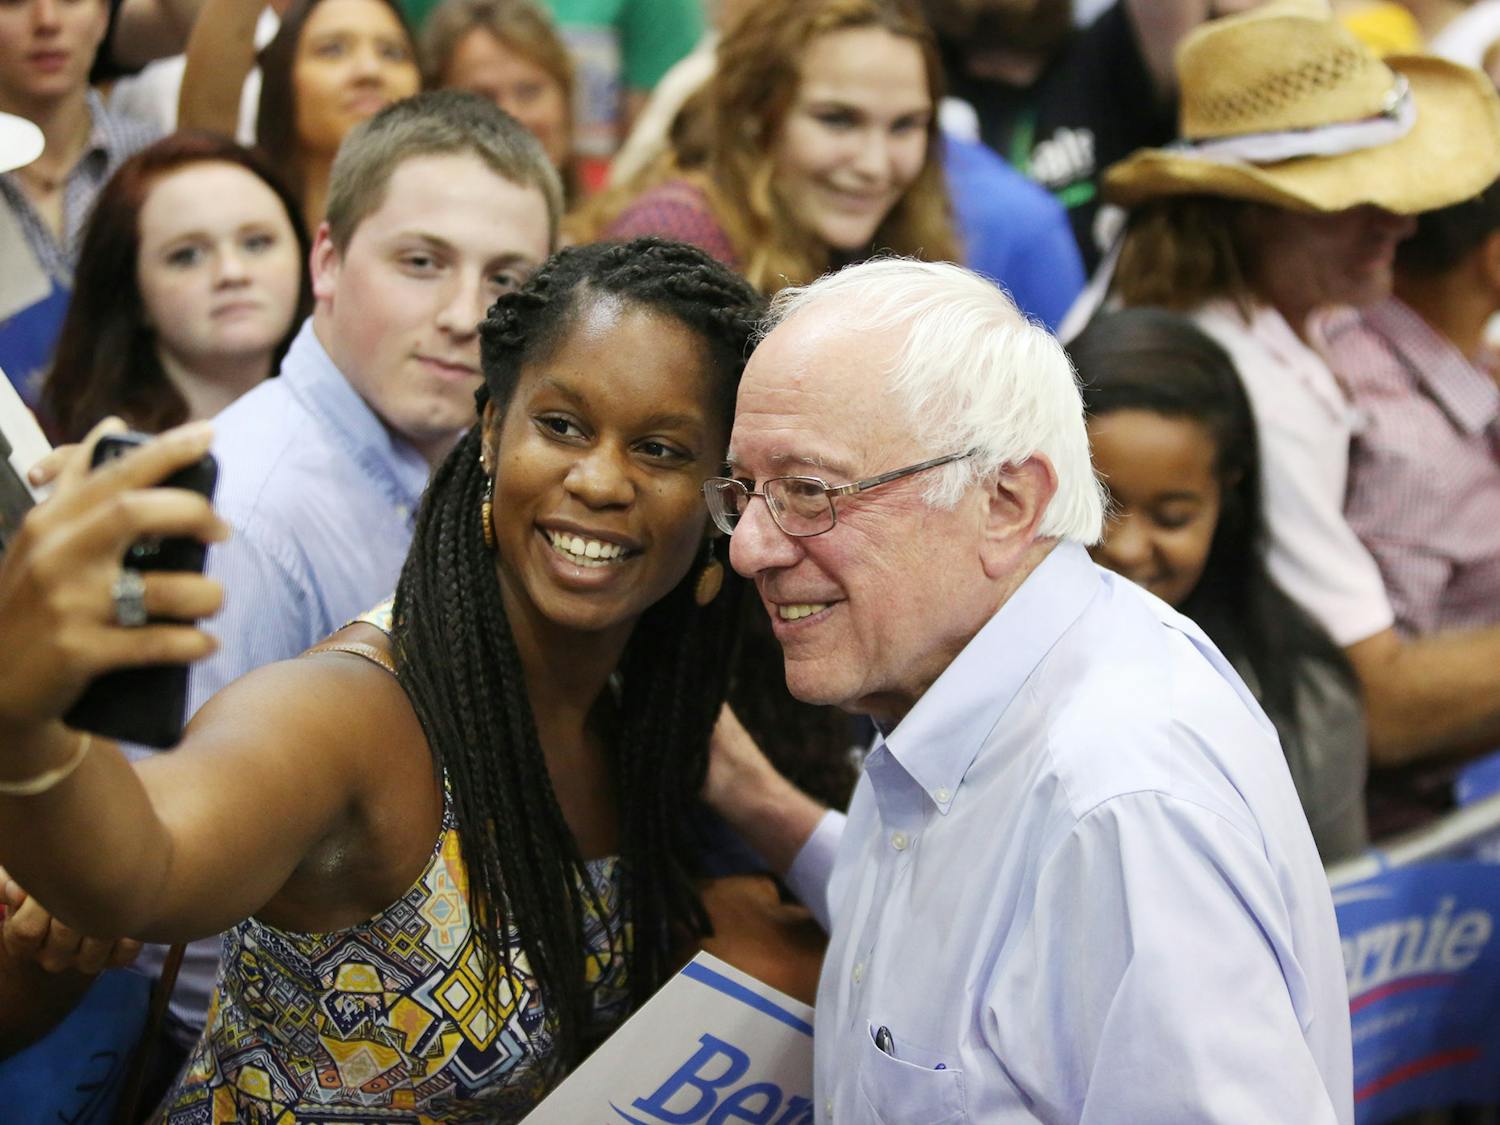 Democratic presidential candidate Sen. Bernie Sanders, I-Vt., right, poses for a photo at a rally, Sunday, July 26, 2015, in Kenner, Louisiana.